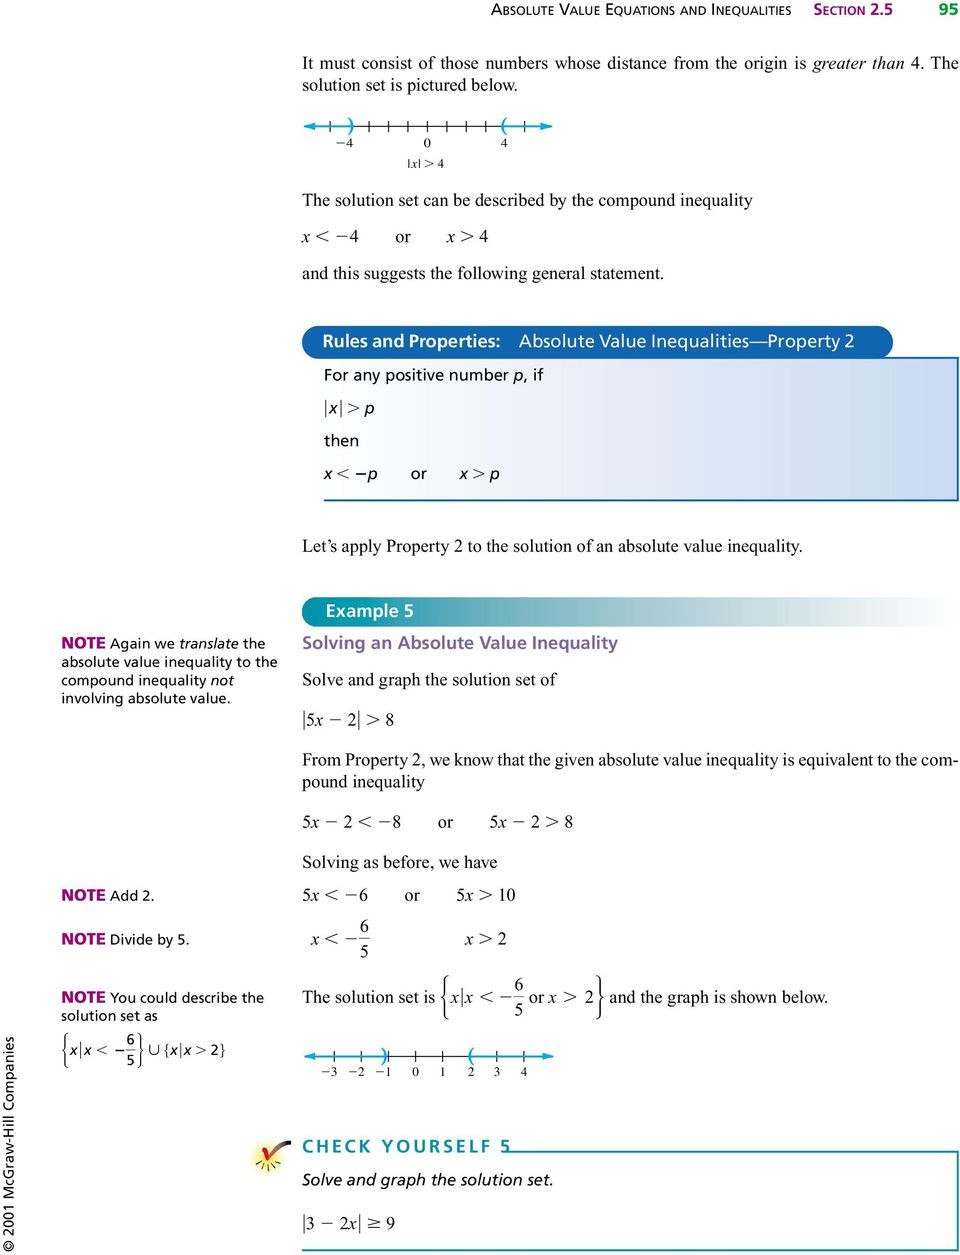 Absolute Value Inequalities Worksheet Answers Absolute Value Equations and Inequalities Pdf Free Download